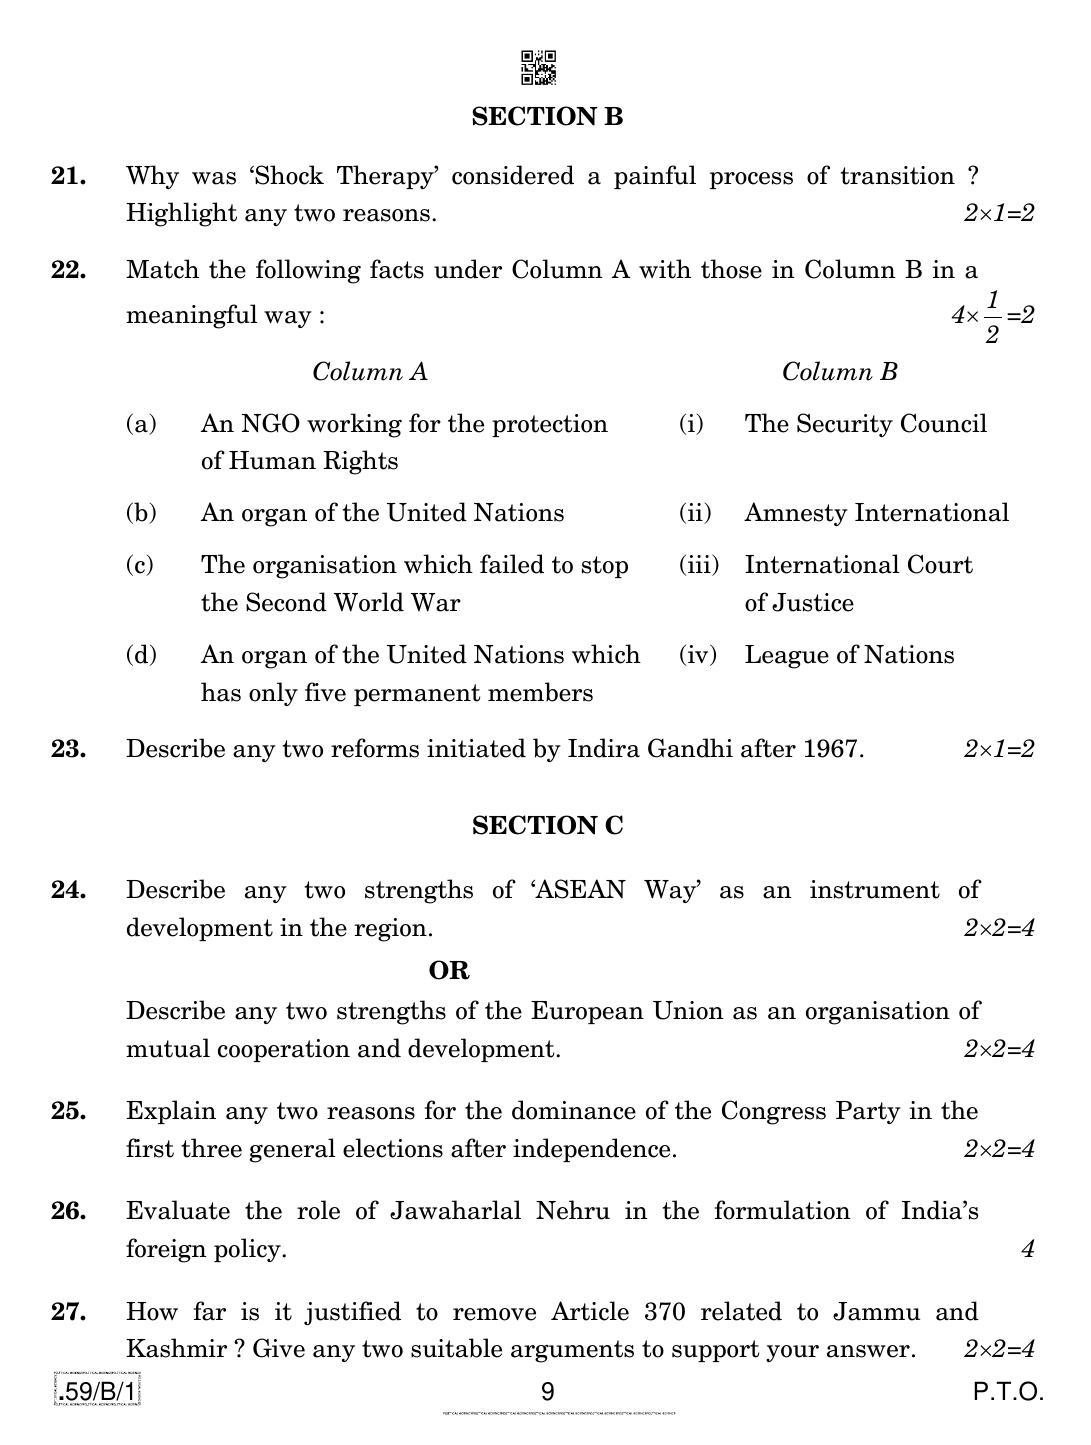 CBSE Class 12 59-C-1 - Political Science 2020 Compartment Question Paper - Page 9